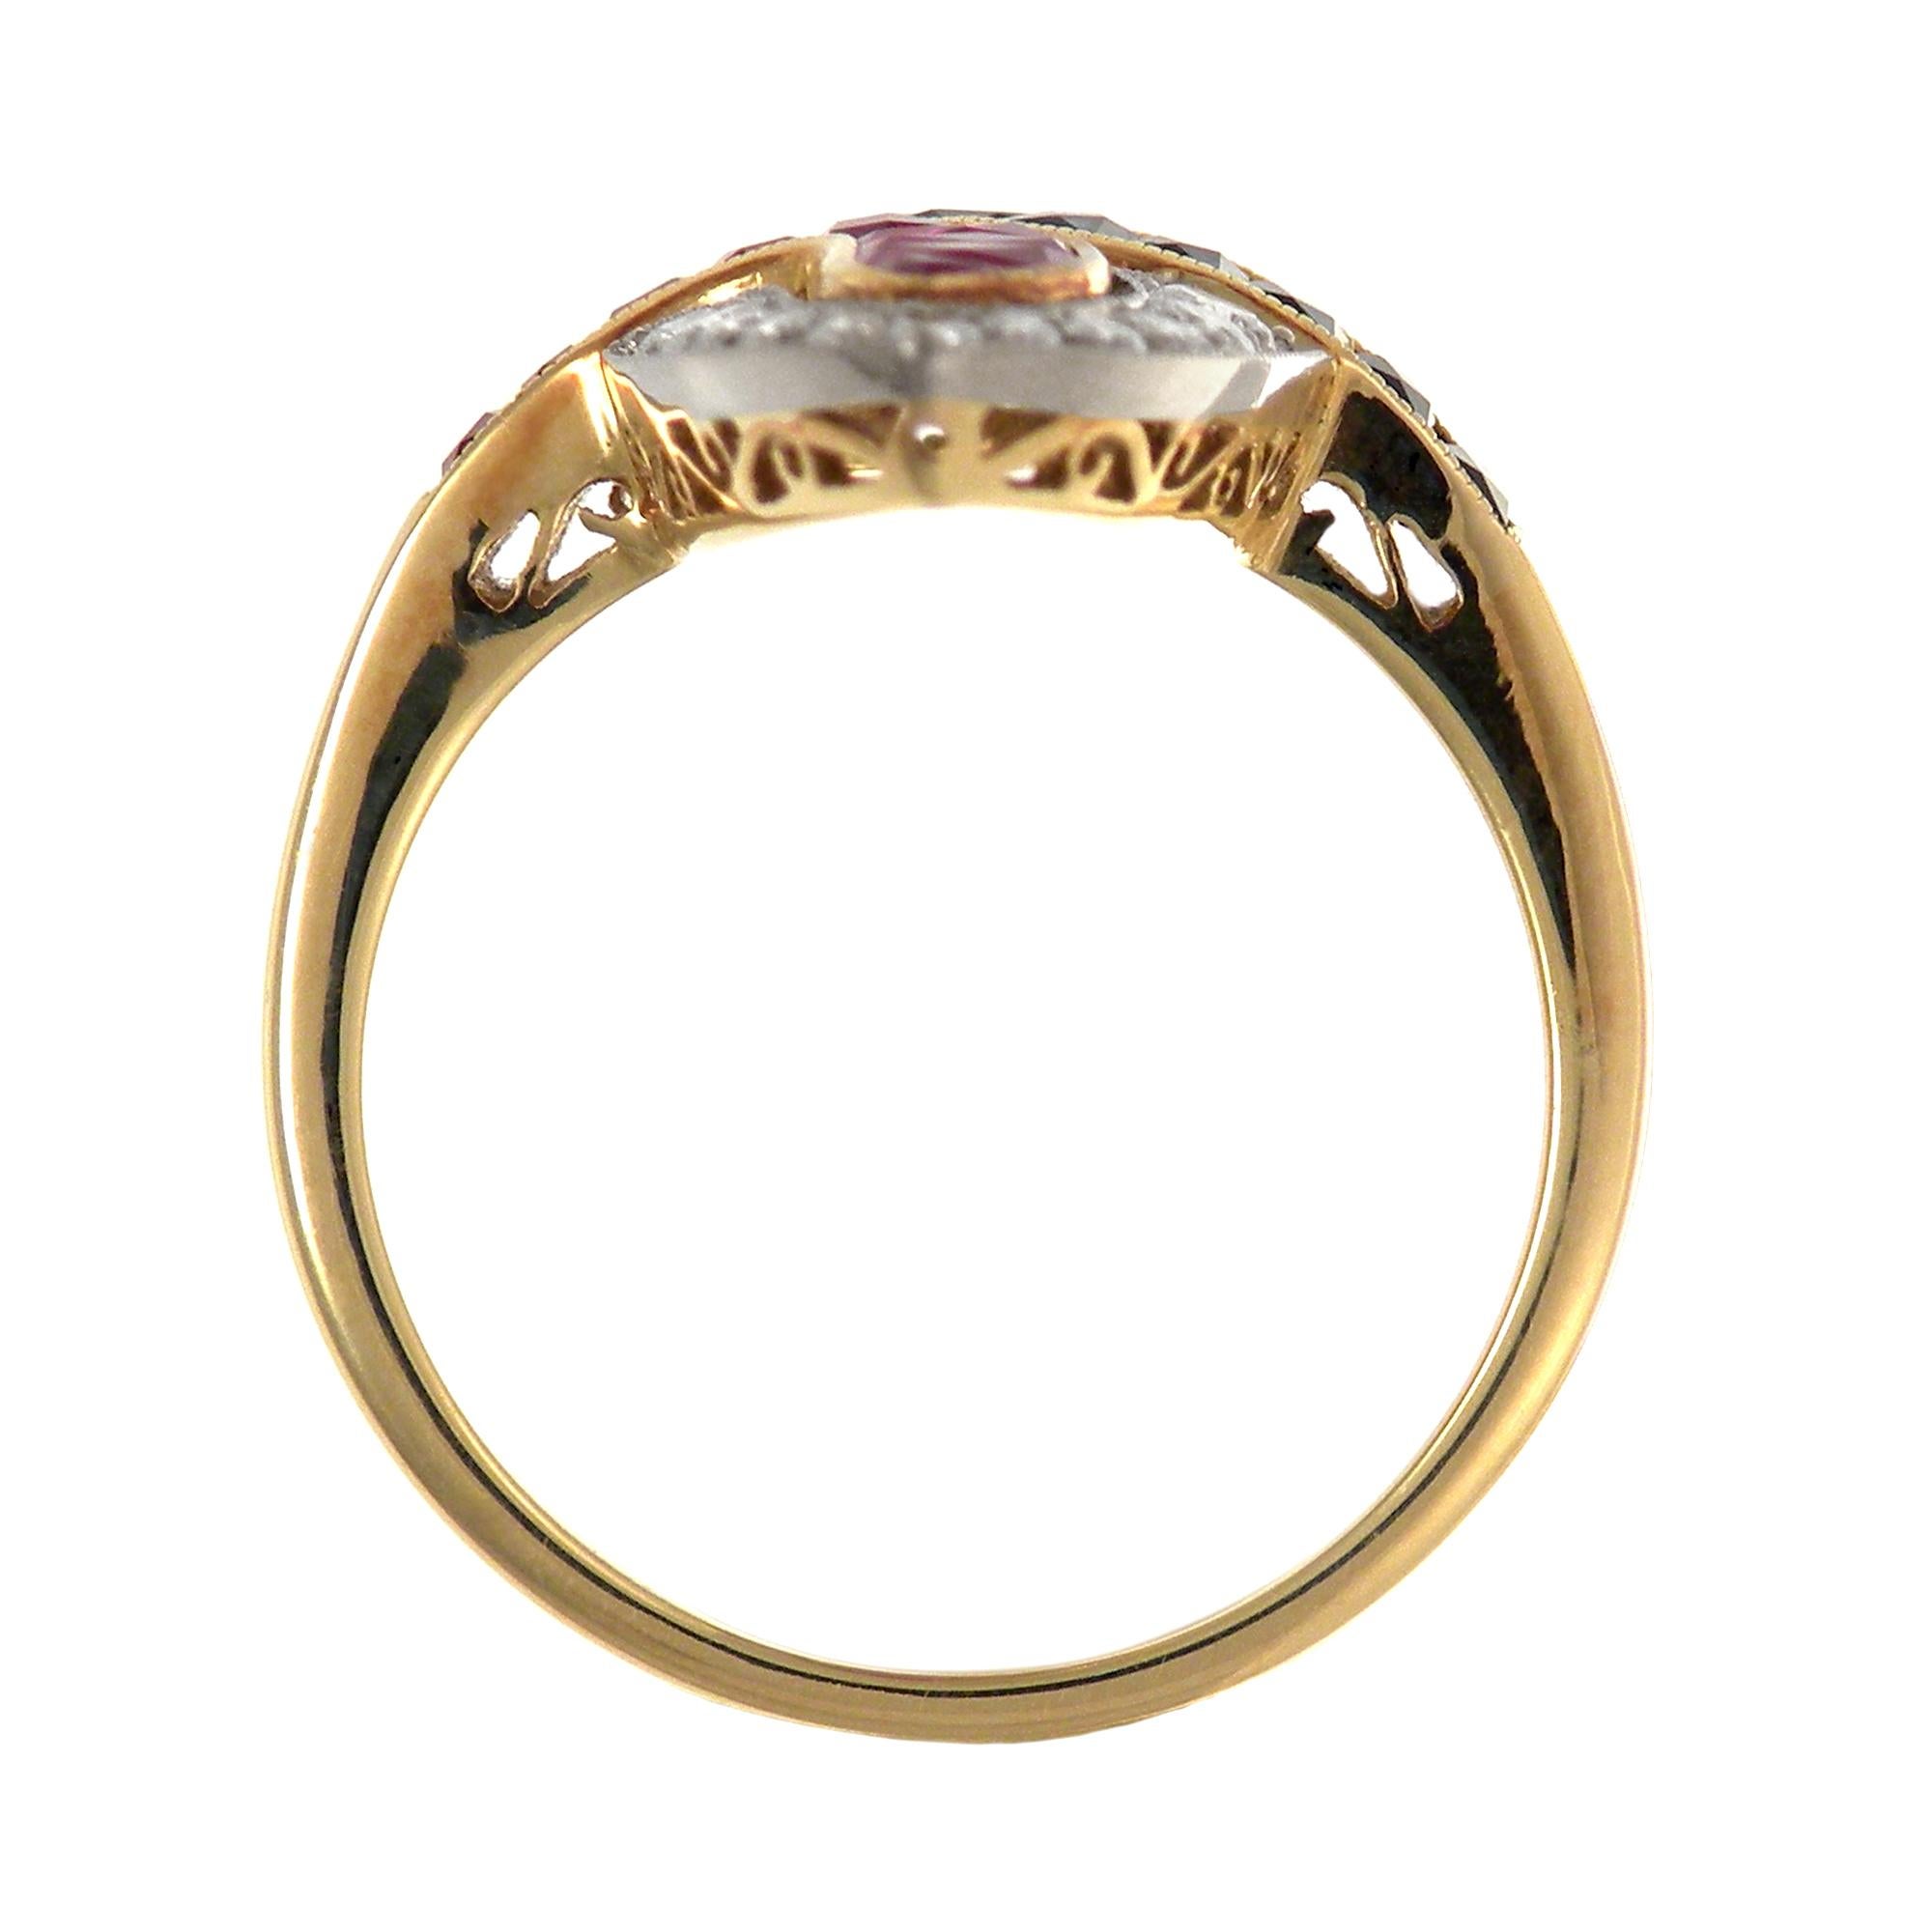 This lovely Antique Sapphire and Ruby ring has been crafted in 18k gold two-tone setting. Ruby weight total 1.15 carats and Sapphire weight total 1.12 carats and further diamonds of 0.37 carats.

Ring size: 6.5